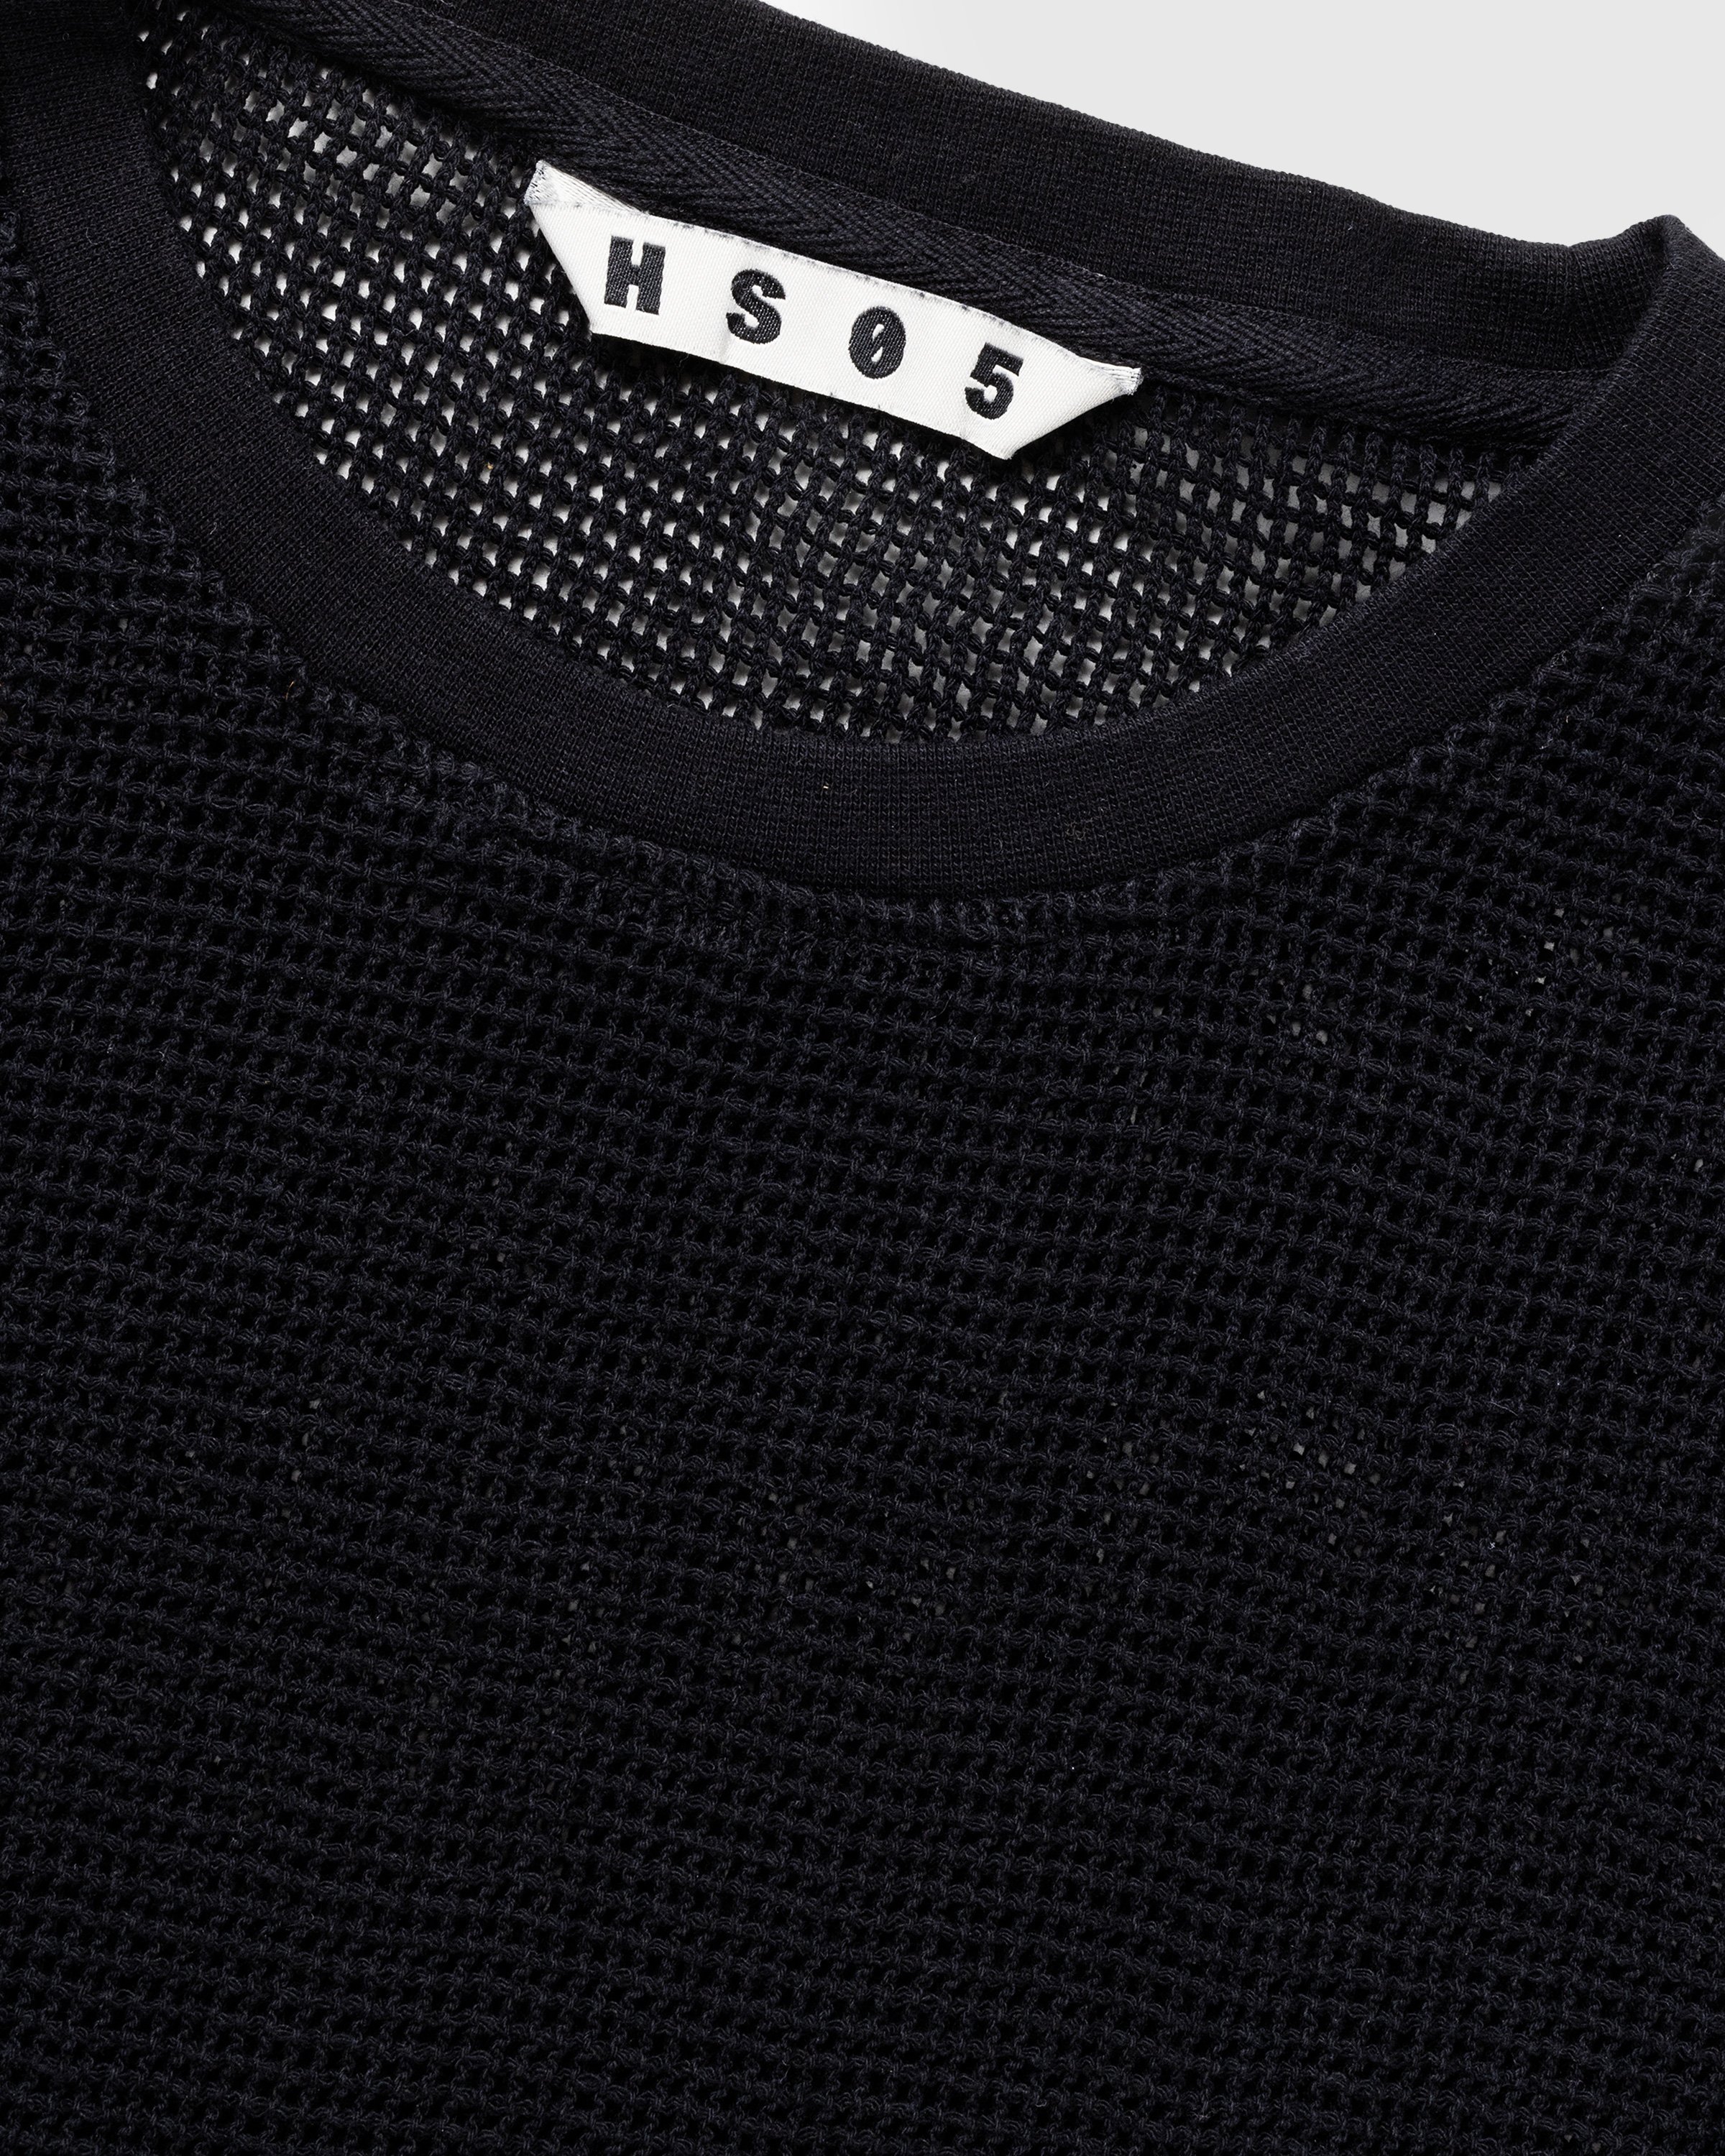 Highsnobiety HS05 - Pigment Dyed Cotton Mesh Knit - Clothing -  - Image 7